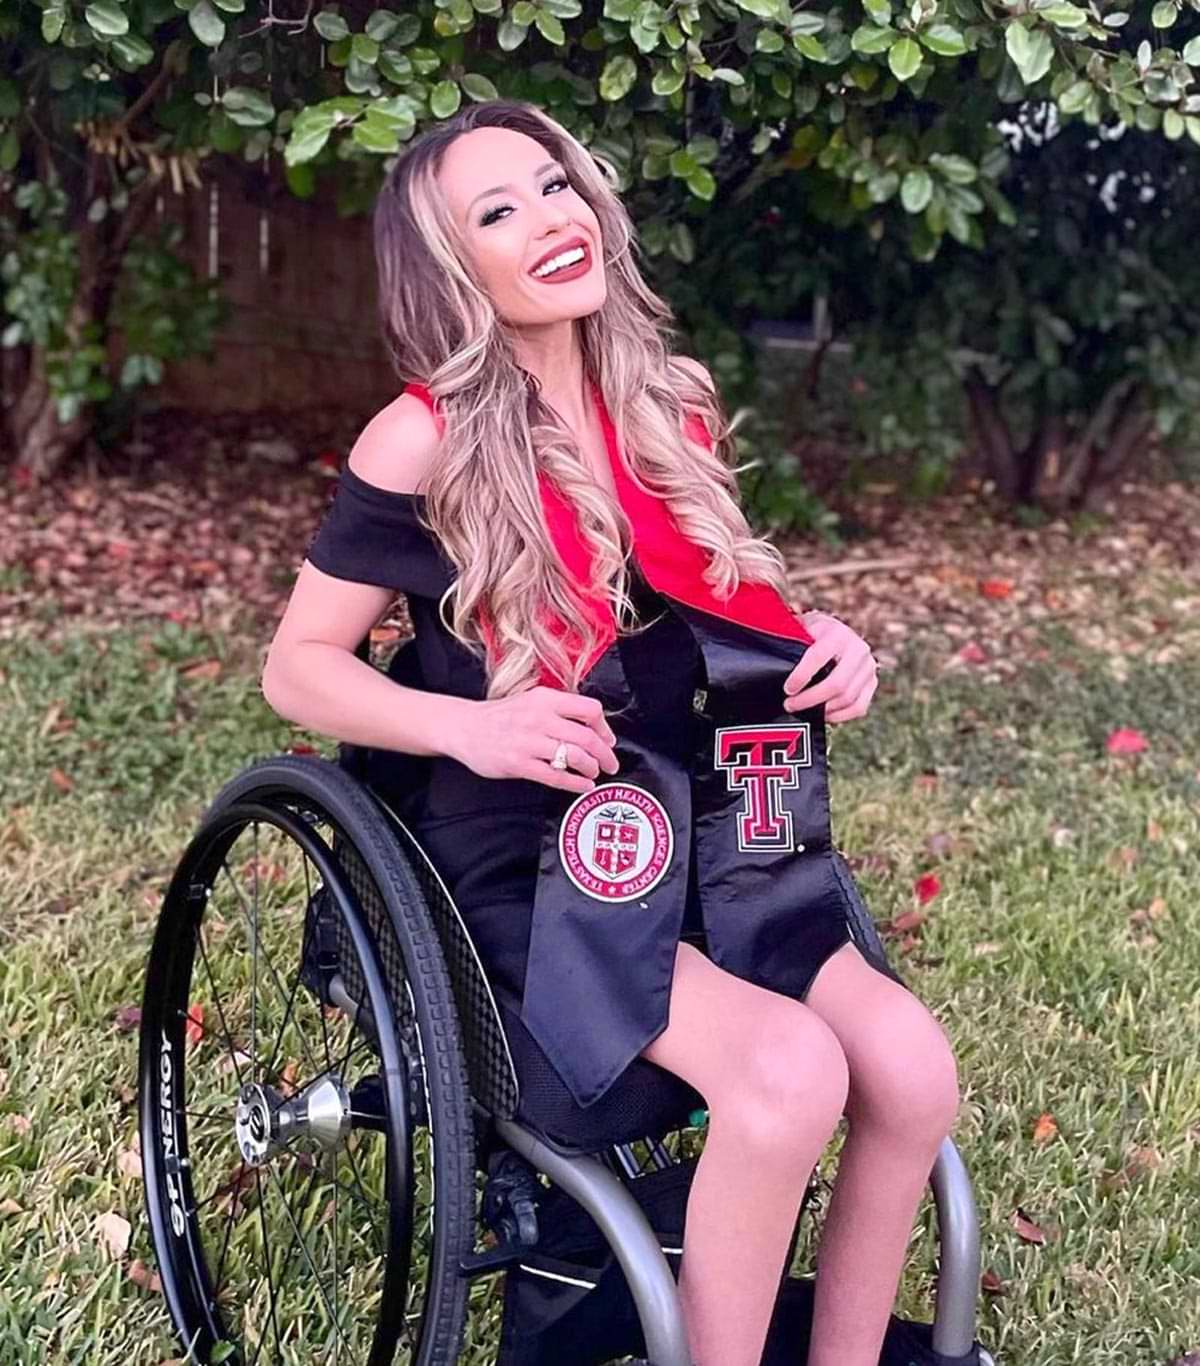 Meagan Prehn, BSN, RN photographed in her wheelchair outside near shrubs, she wears a black dress and a Texas Tech grad stole beneath her long curly hair, she smiles at the camera